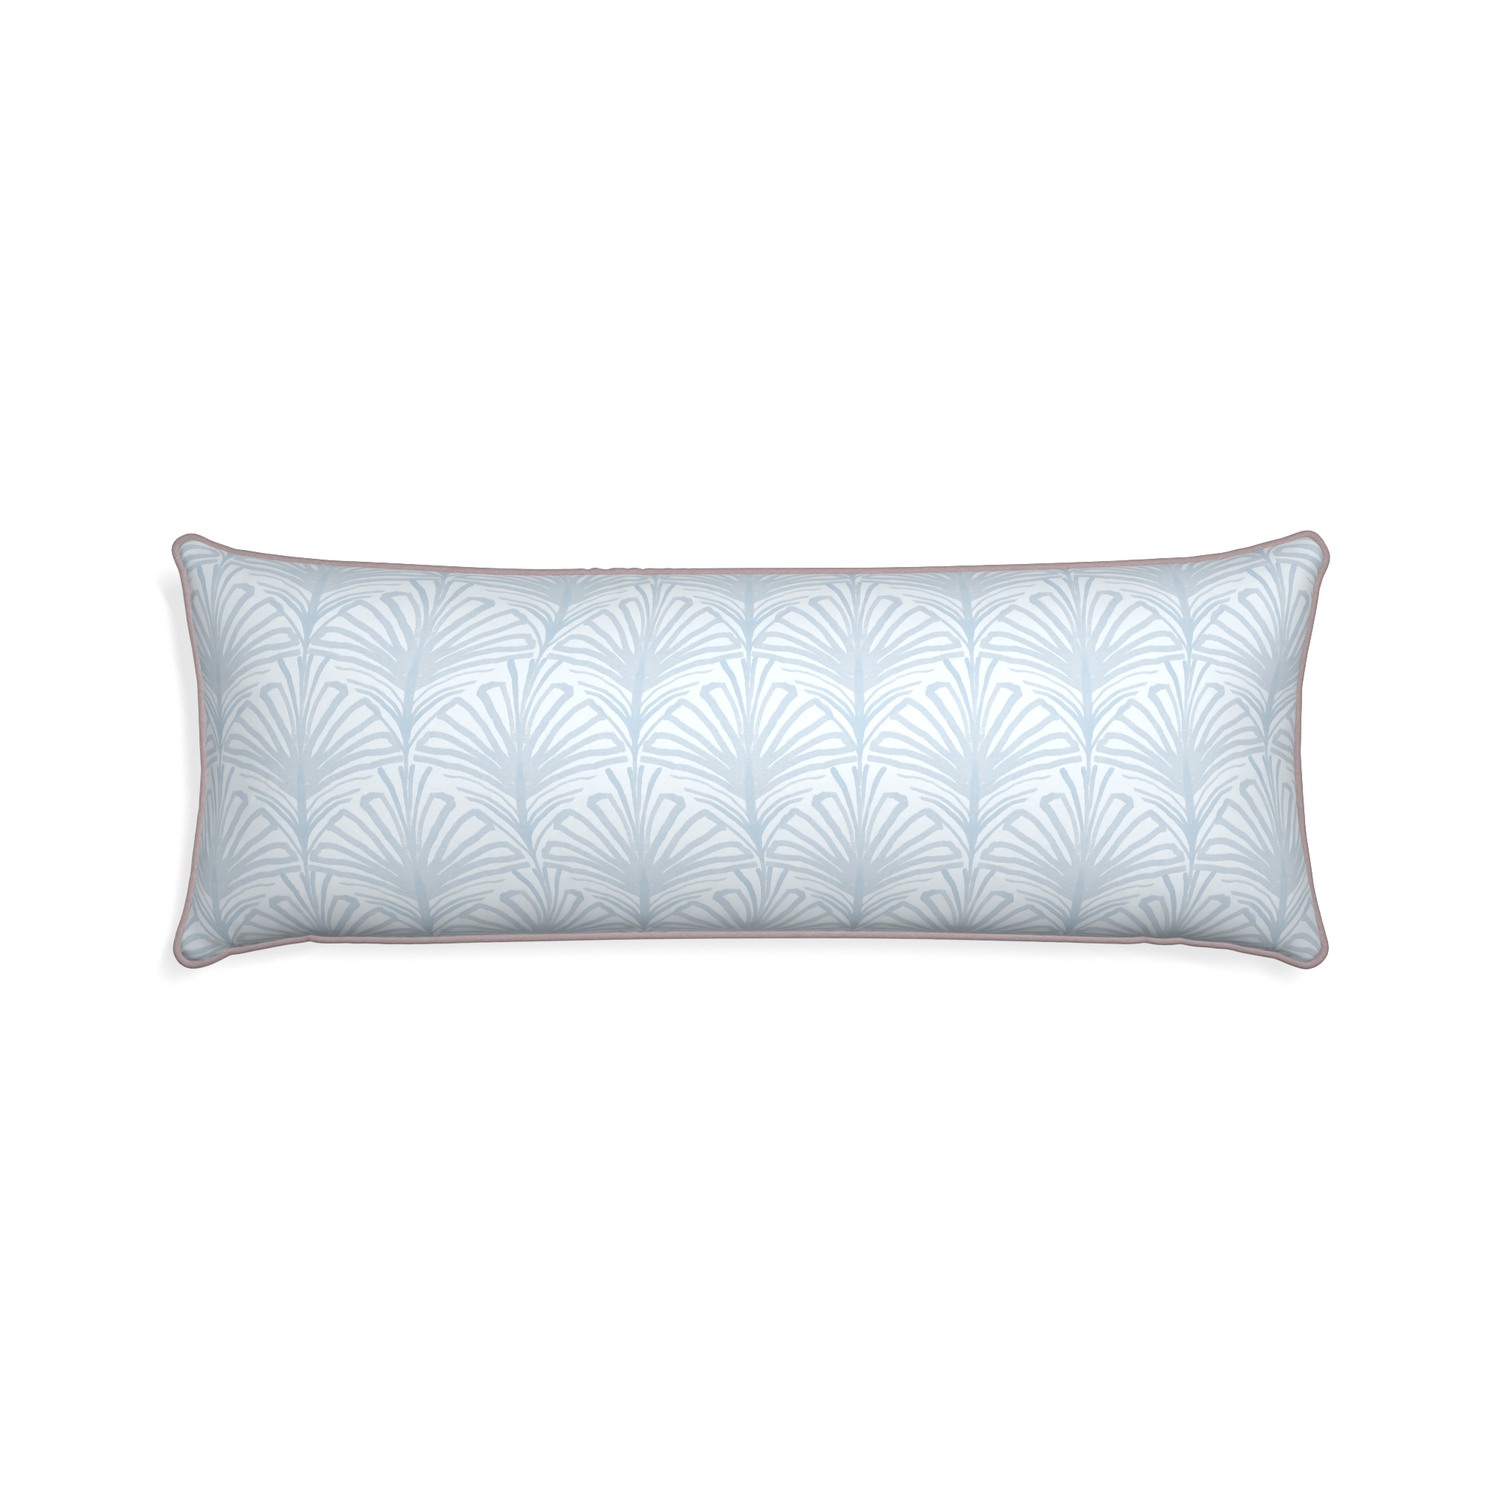 Xl-lumbar suzy sky custom sky blue palmpillow with orchid piping on white background